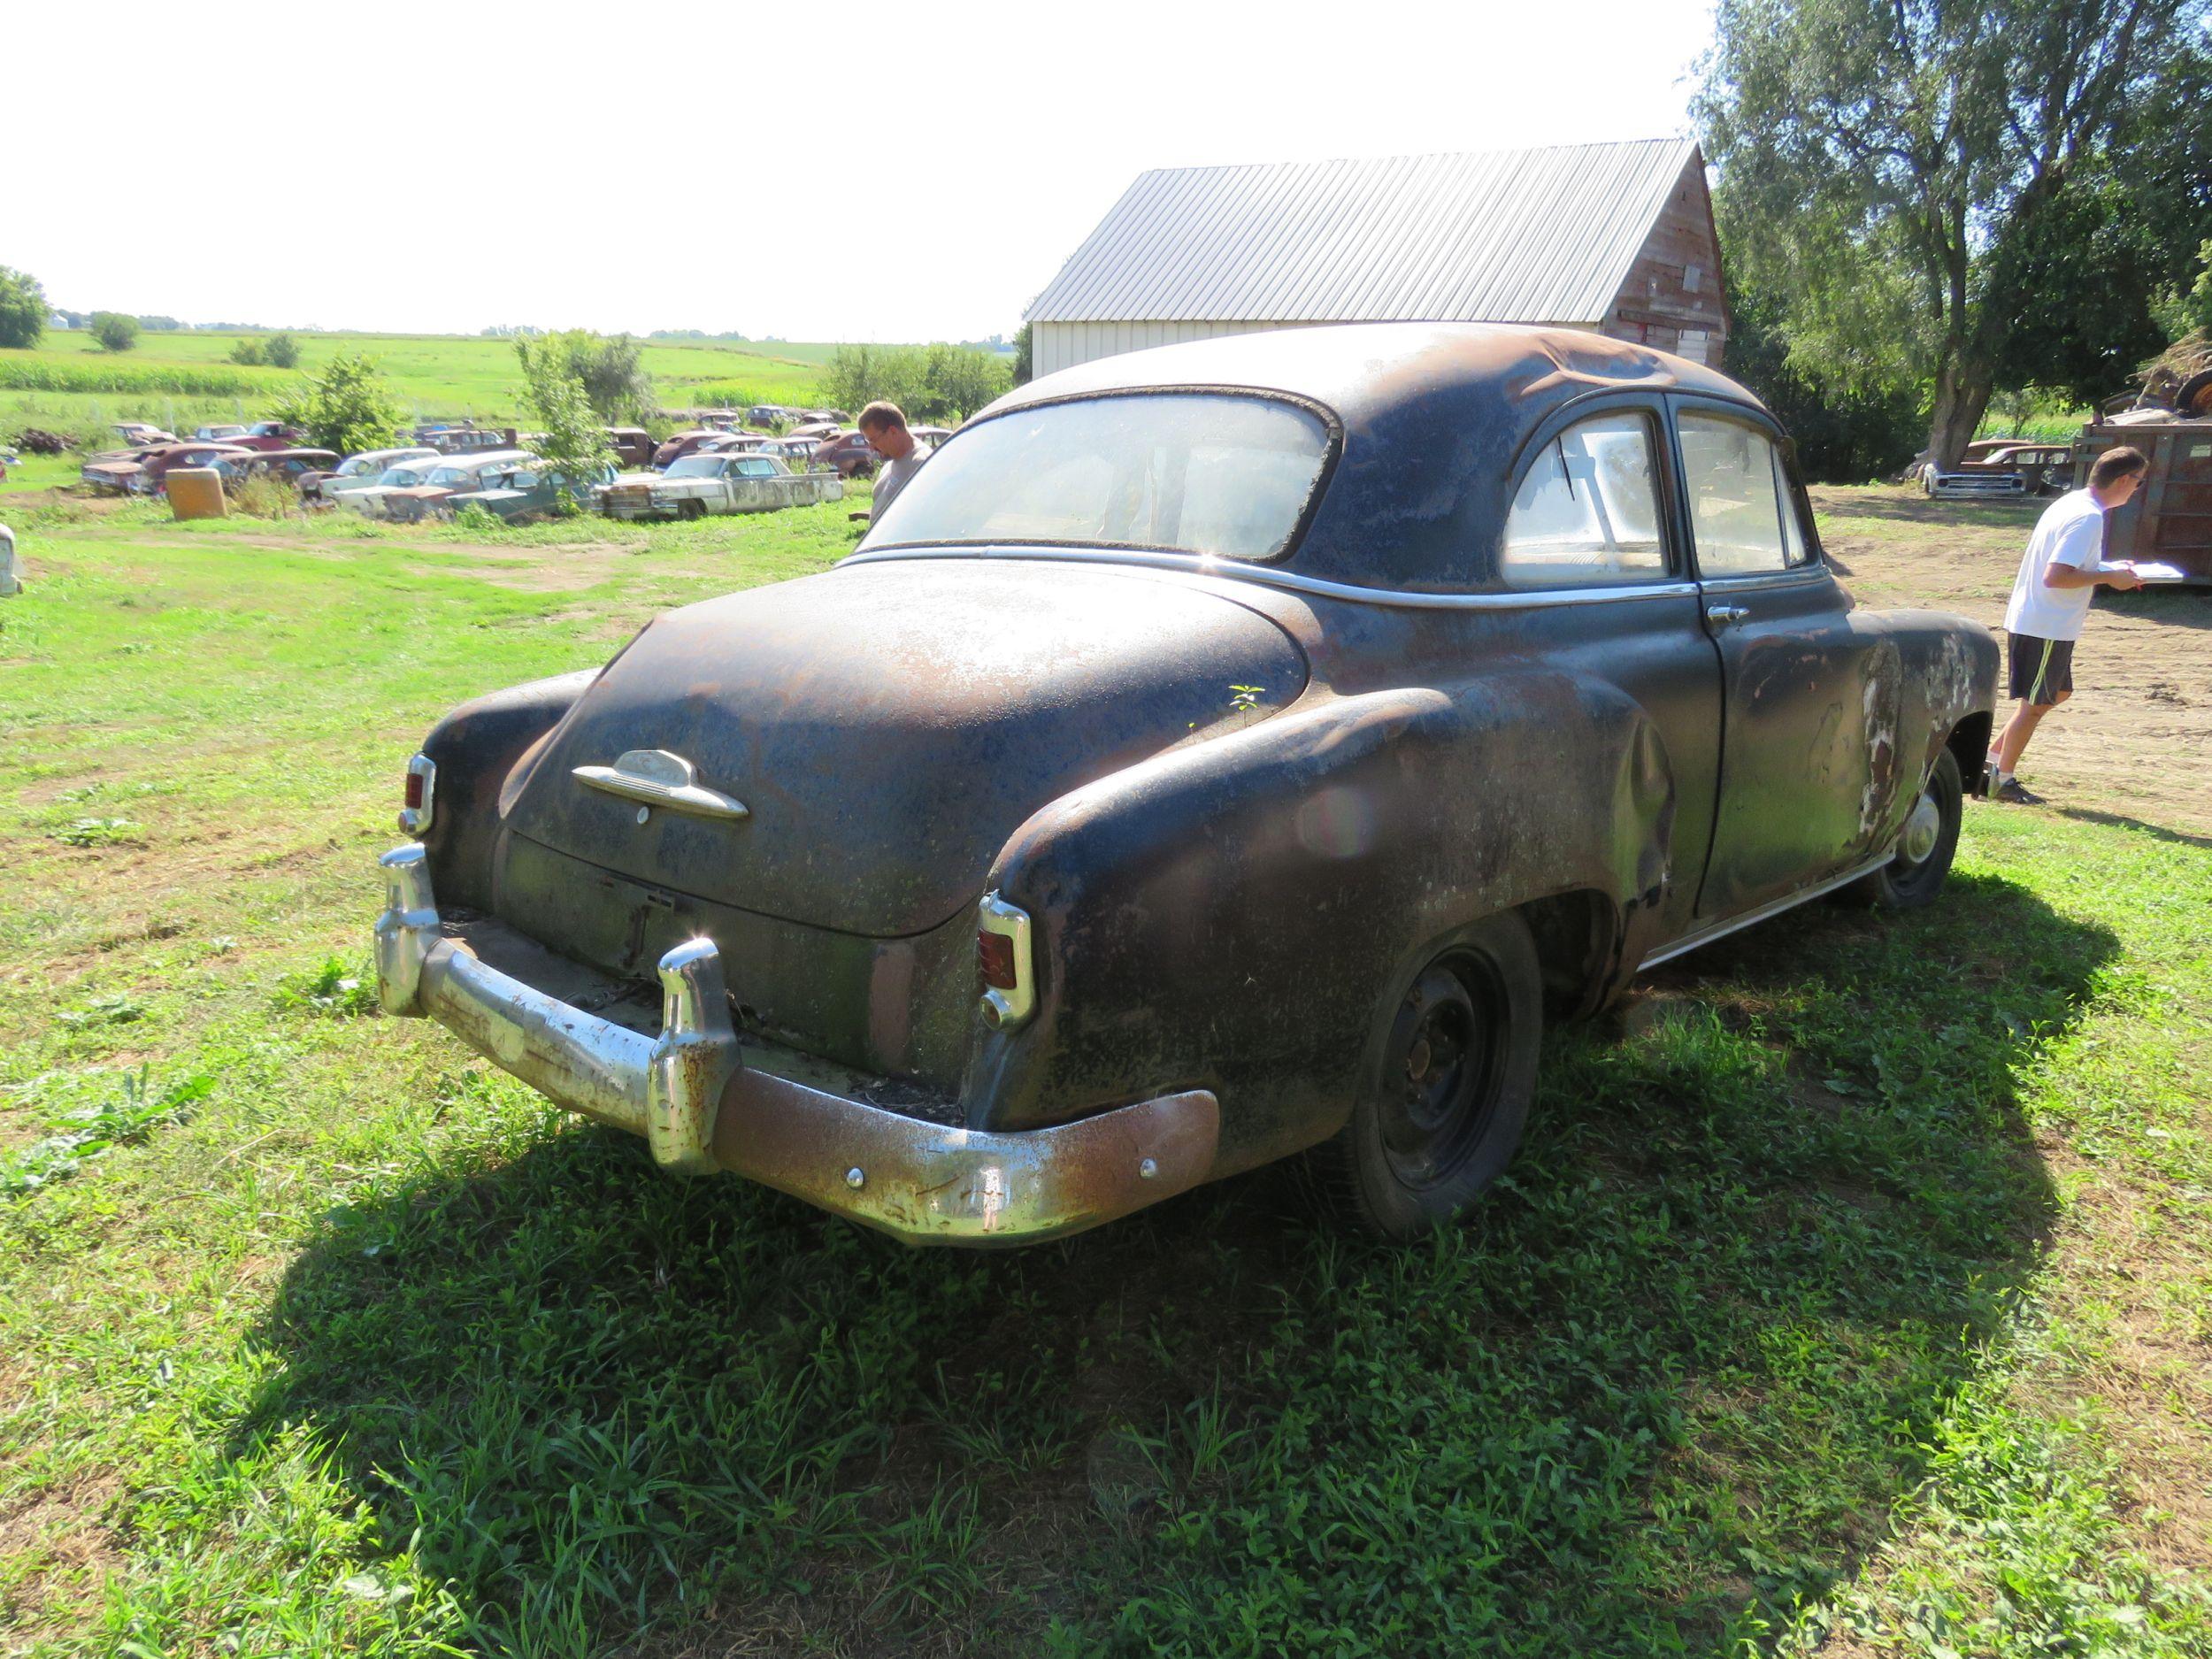 1952 Chevrolet 2dr Sedan for Project or Parts